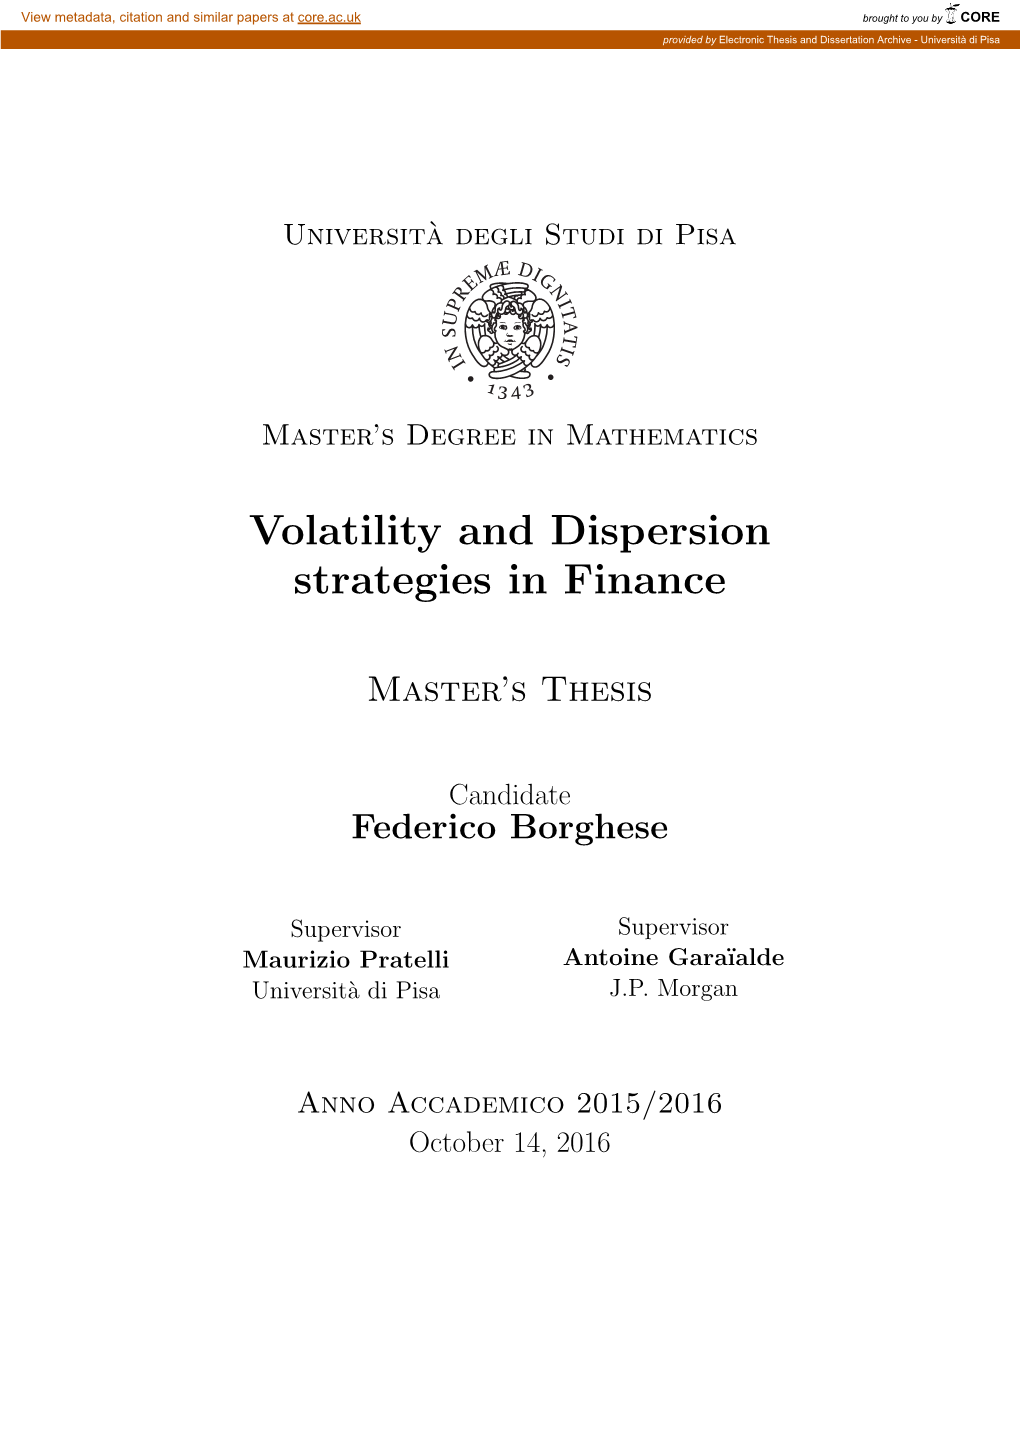 Volatility and Dispersion Strategies in Finance